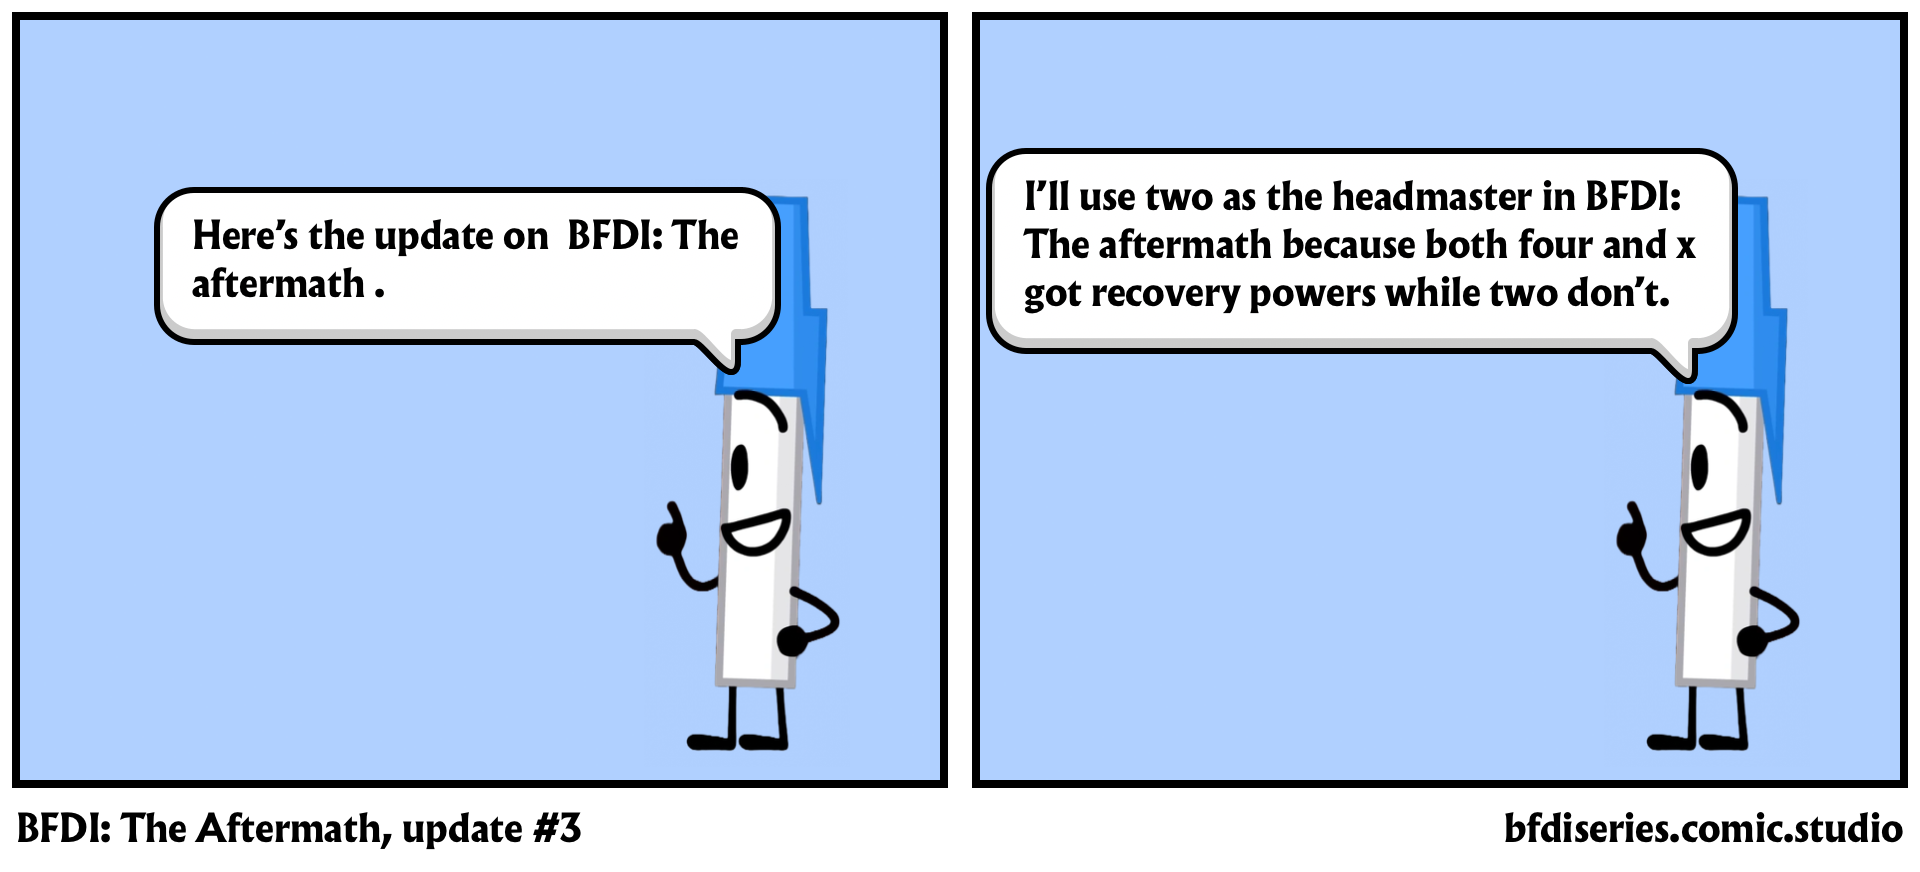 BFDI: The Aftermath, update #3